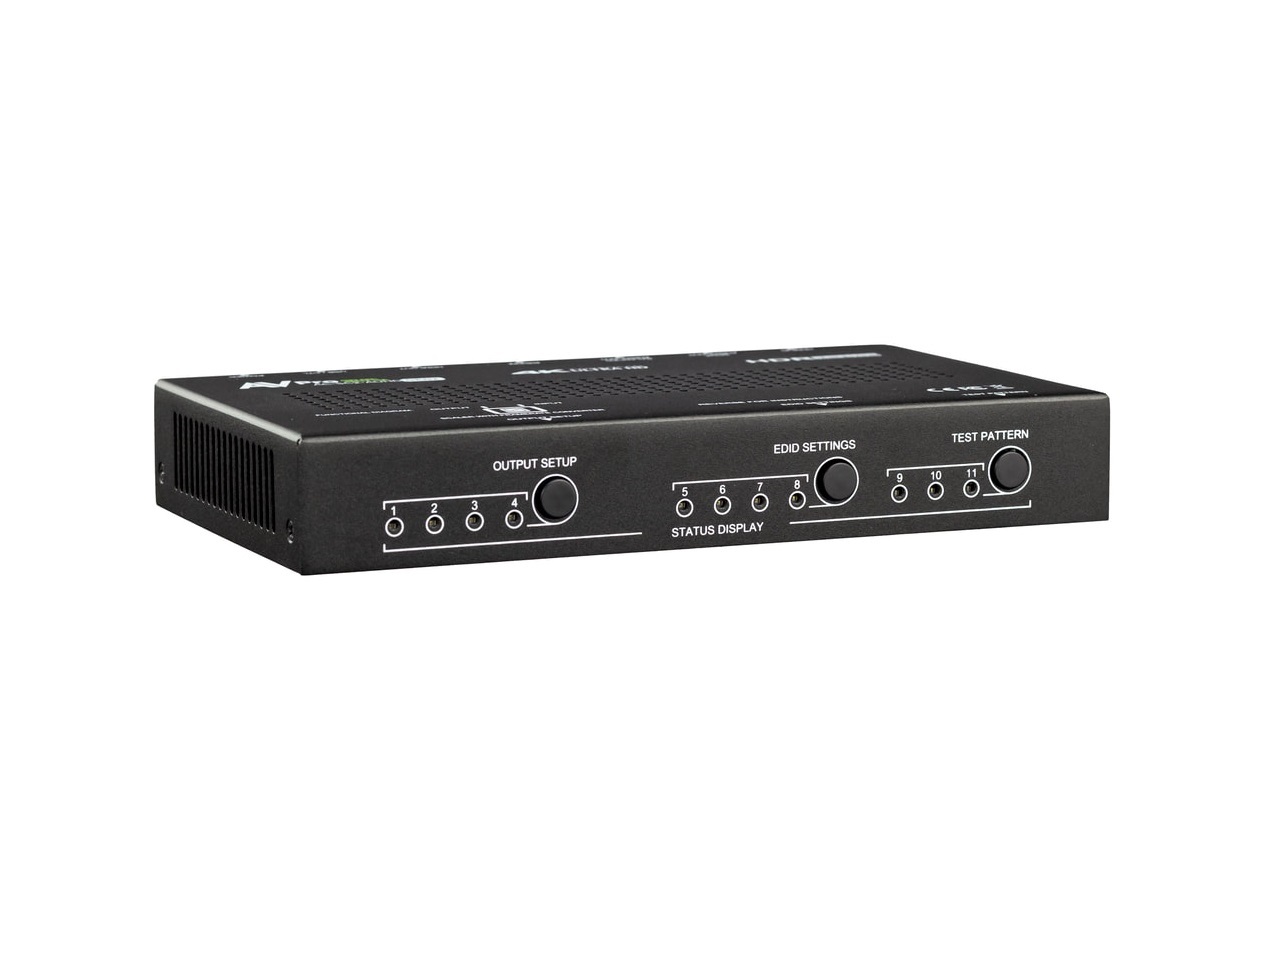 AVPro Edge AC-SC2-AUHD-GEN2 4K Up/Down HDMI Scaler with 480 to 4K and Adaptive Scaling